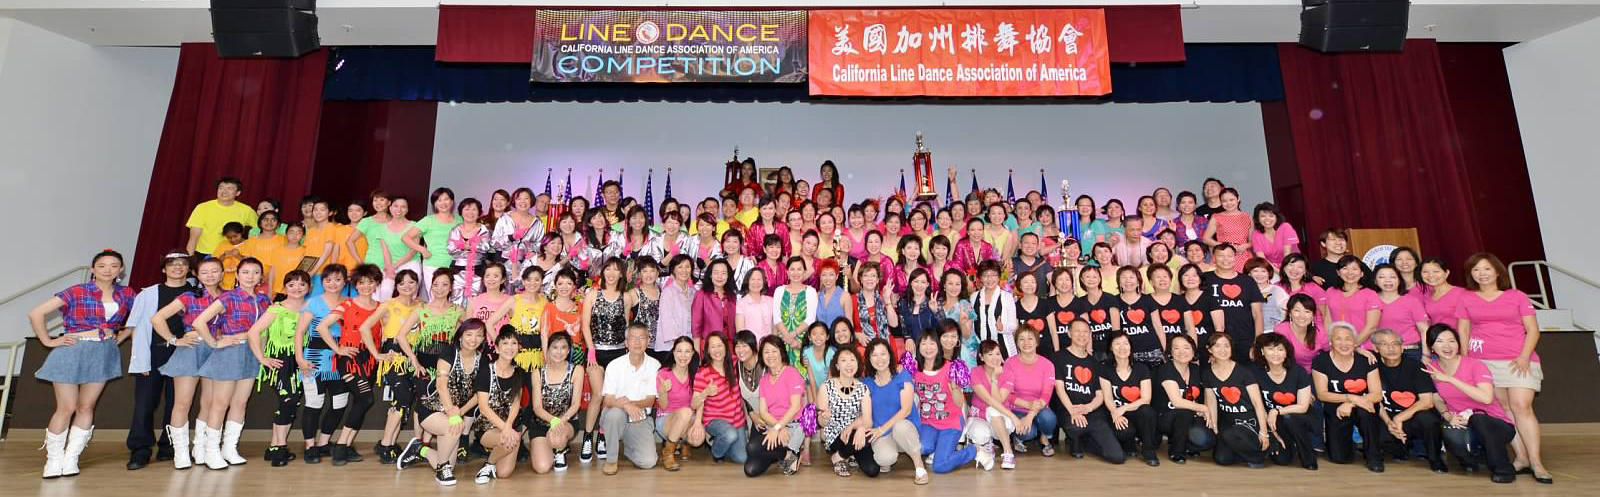 CLDAA Line Dance Competition 6/28/2015 